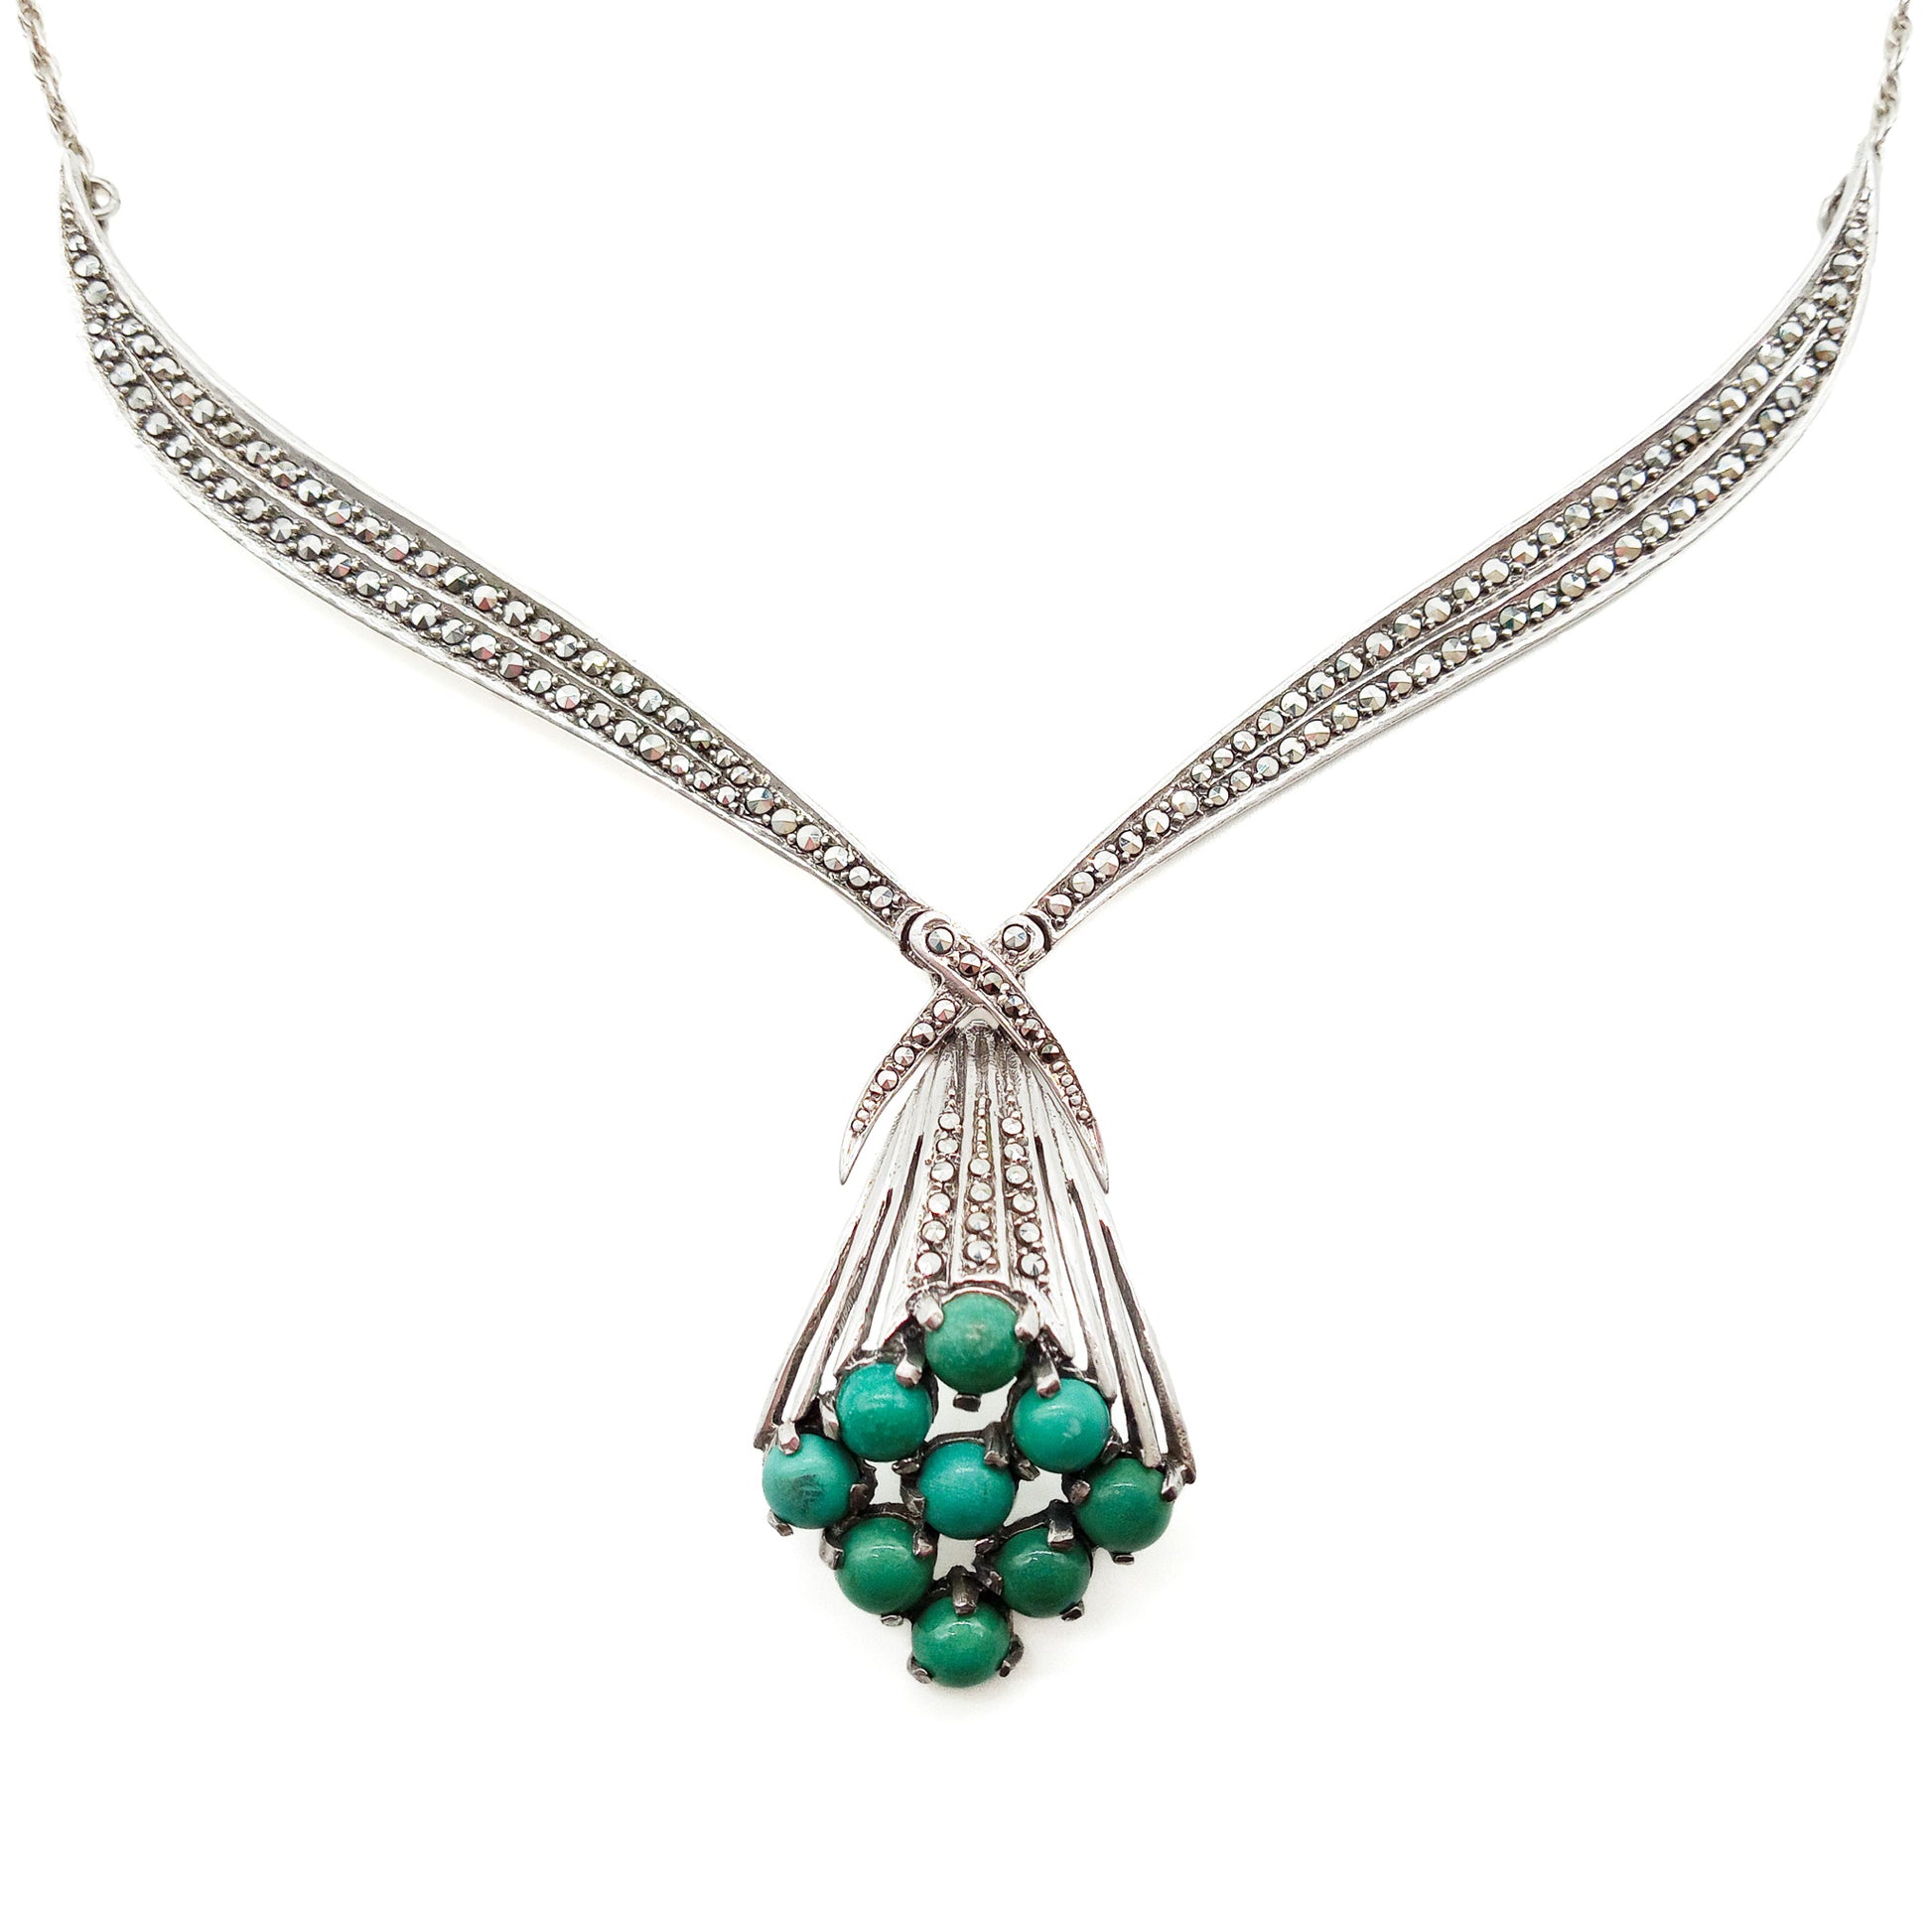 Stunning Art Deco sterling silver necklace set with nine natural turquoise stones and a meleé of marcasites on a rope chain.